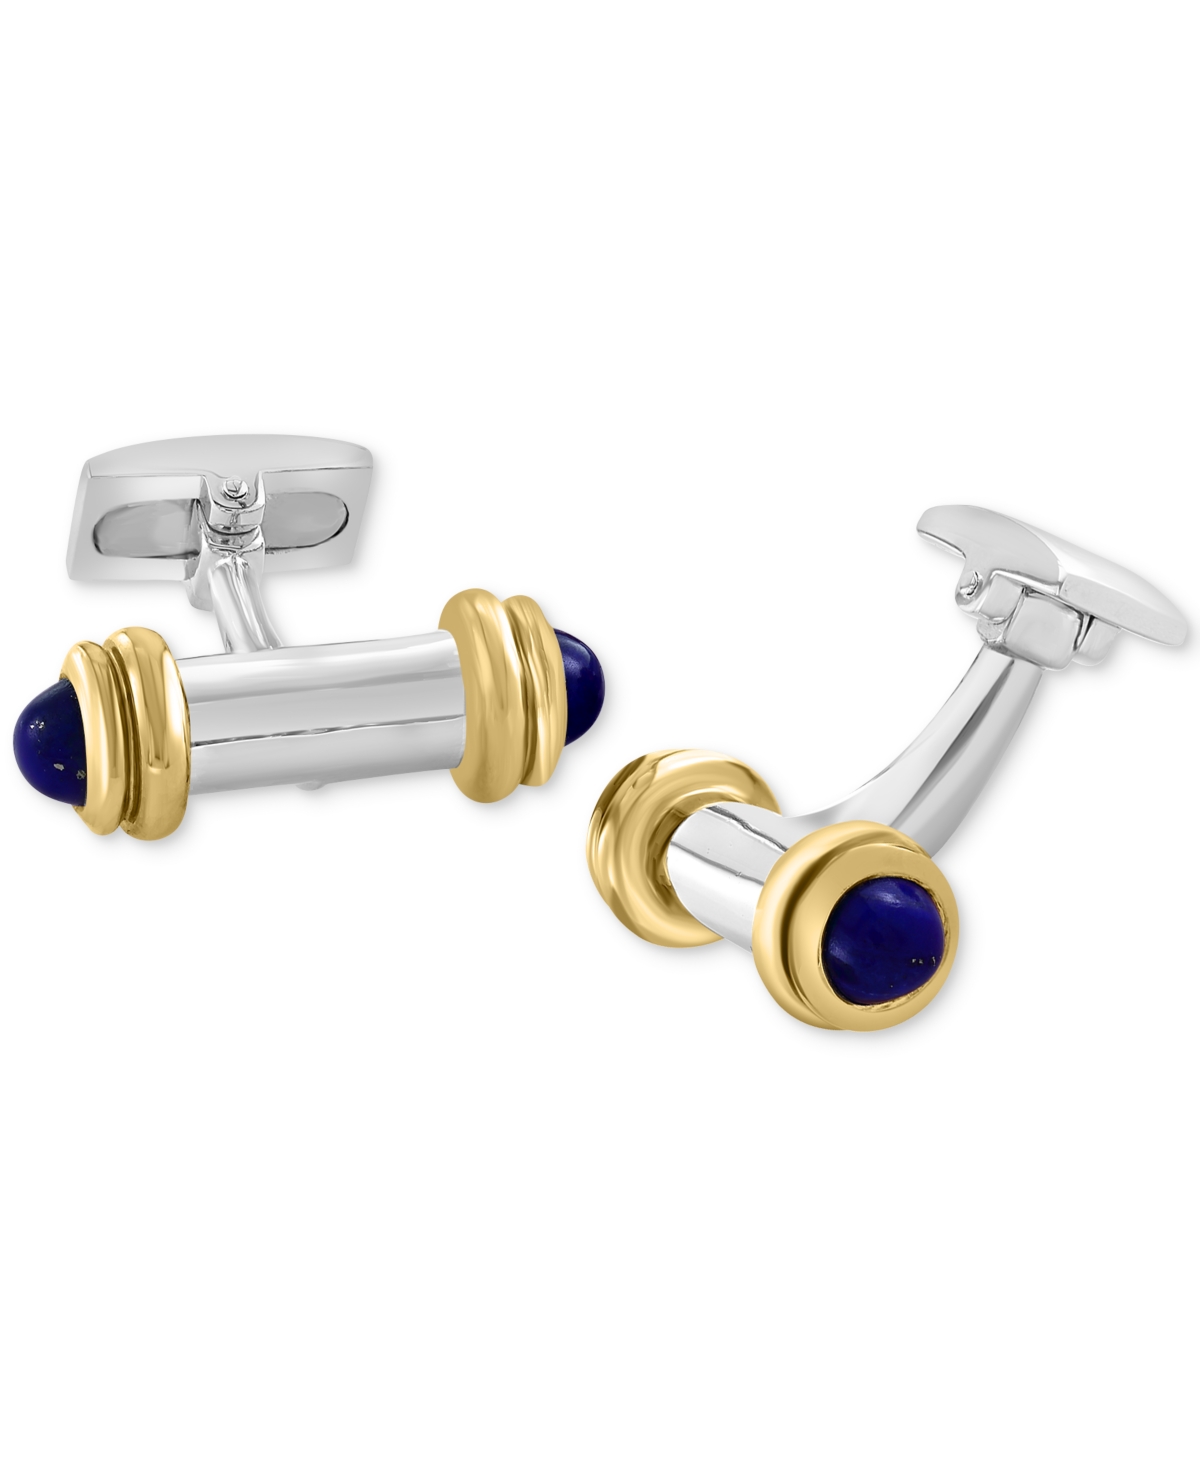 Effy Men's Lapis Lazuli Bar Cufflinks in 18K Yellow Gold Plated Sterling Silver & Sterling Silver - Silver